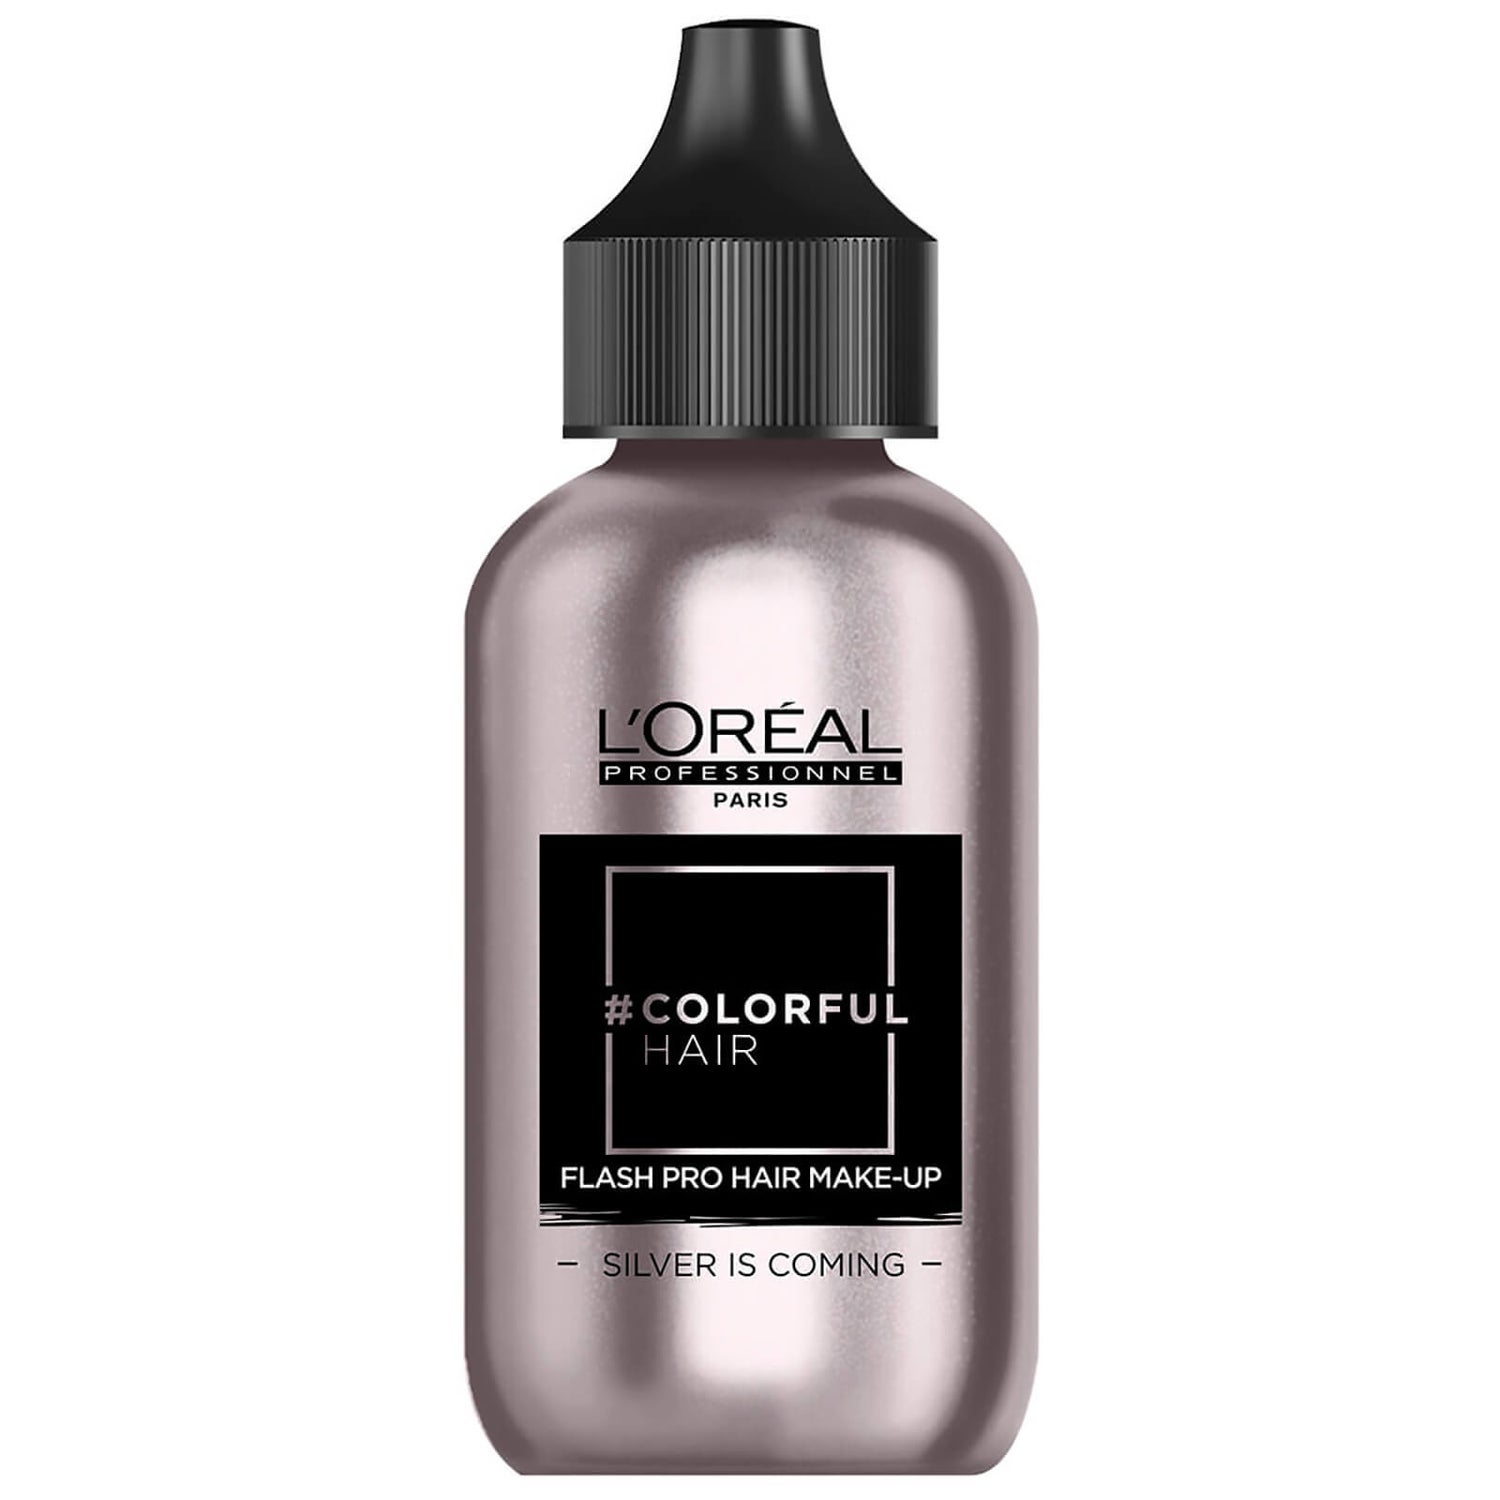 L'Oréal Professionnel Flash Pro Hair Make-Up - Silver is Coming 60ml